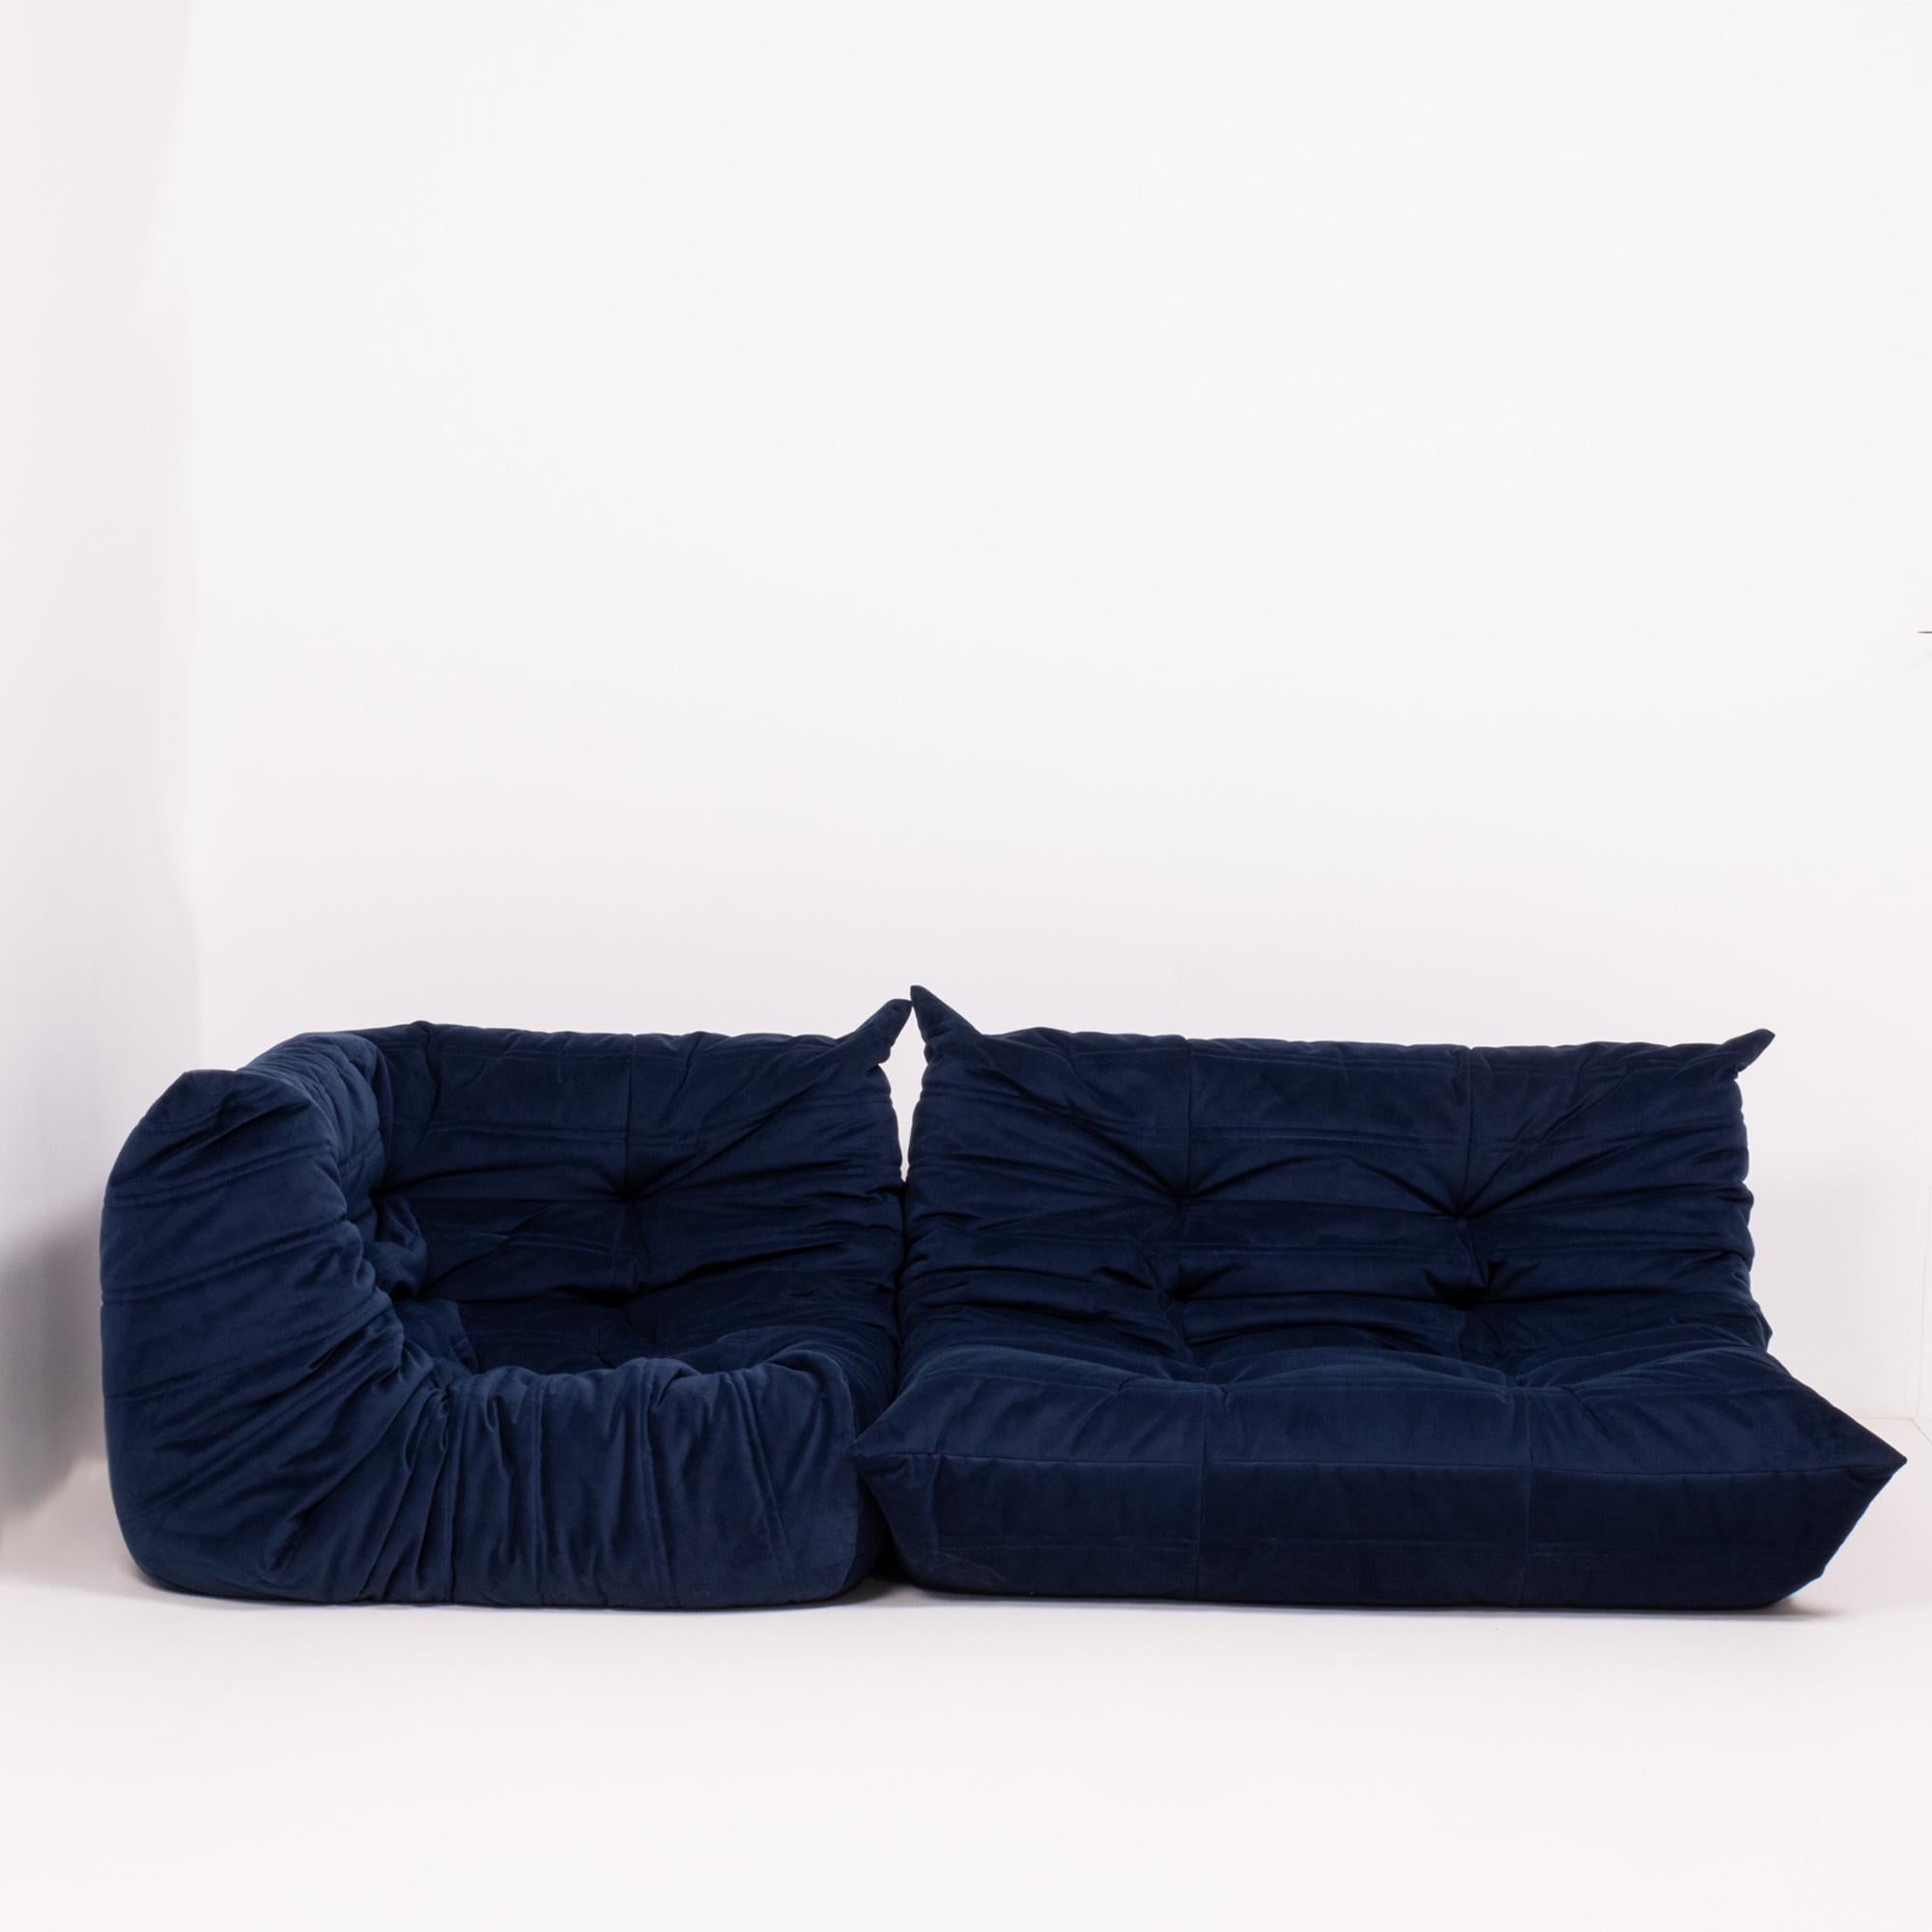 Late 20th Century Togo Blue Modular Sofa and Footstool by Michel Ducaroy for Ligne Roset, Set of 6